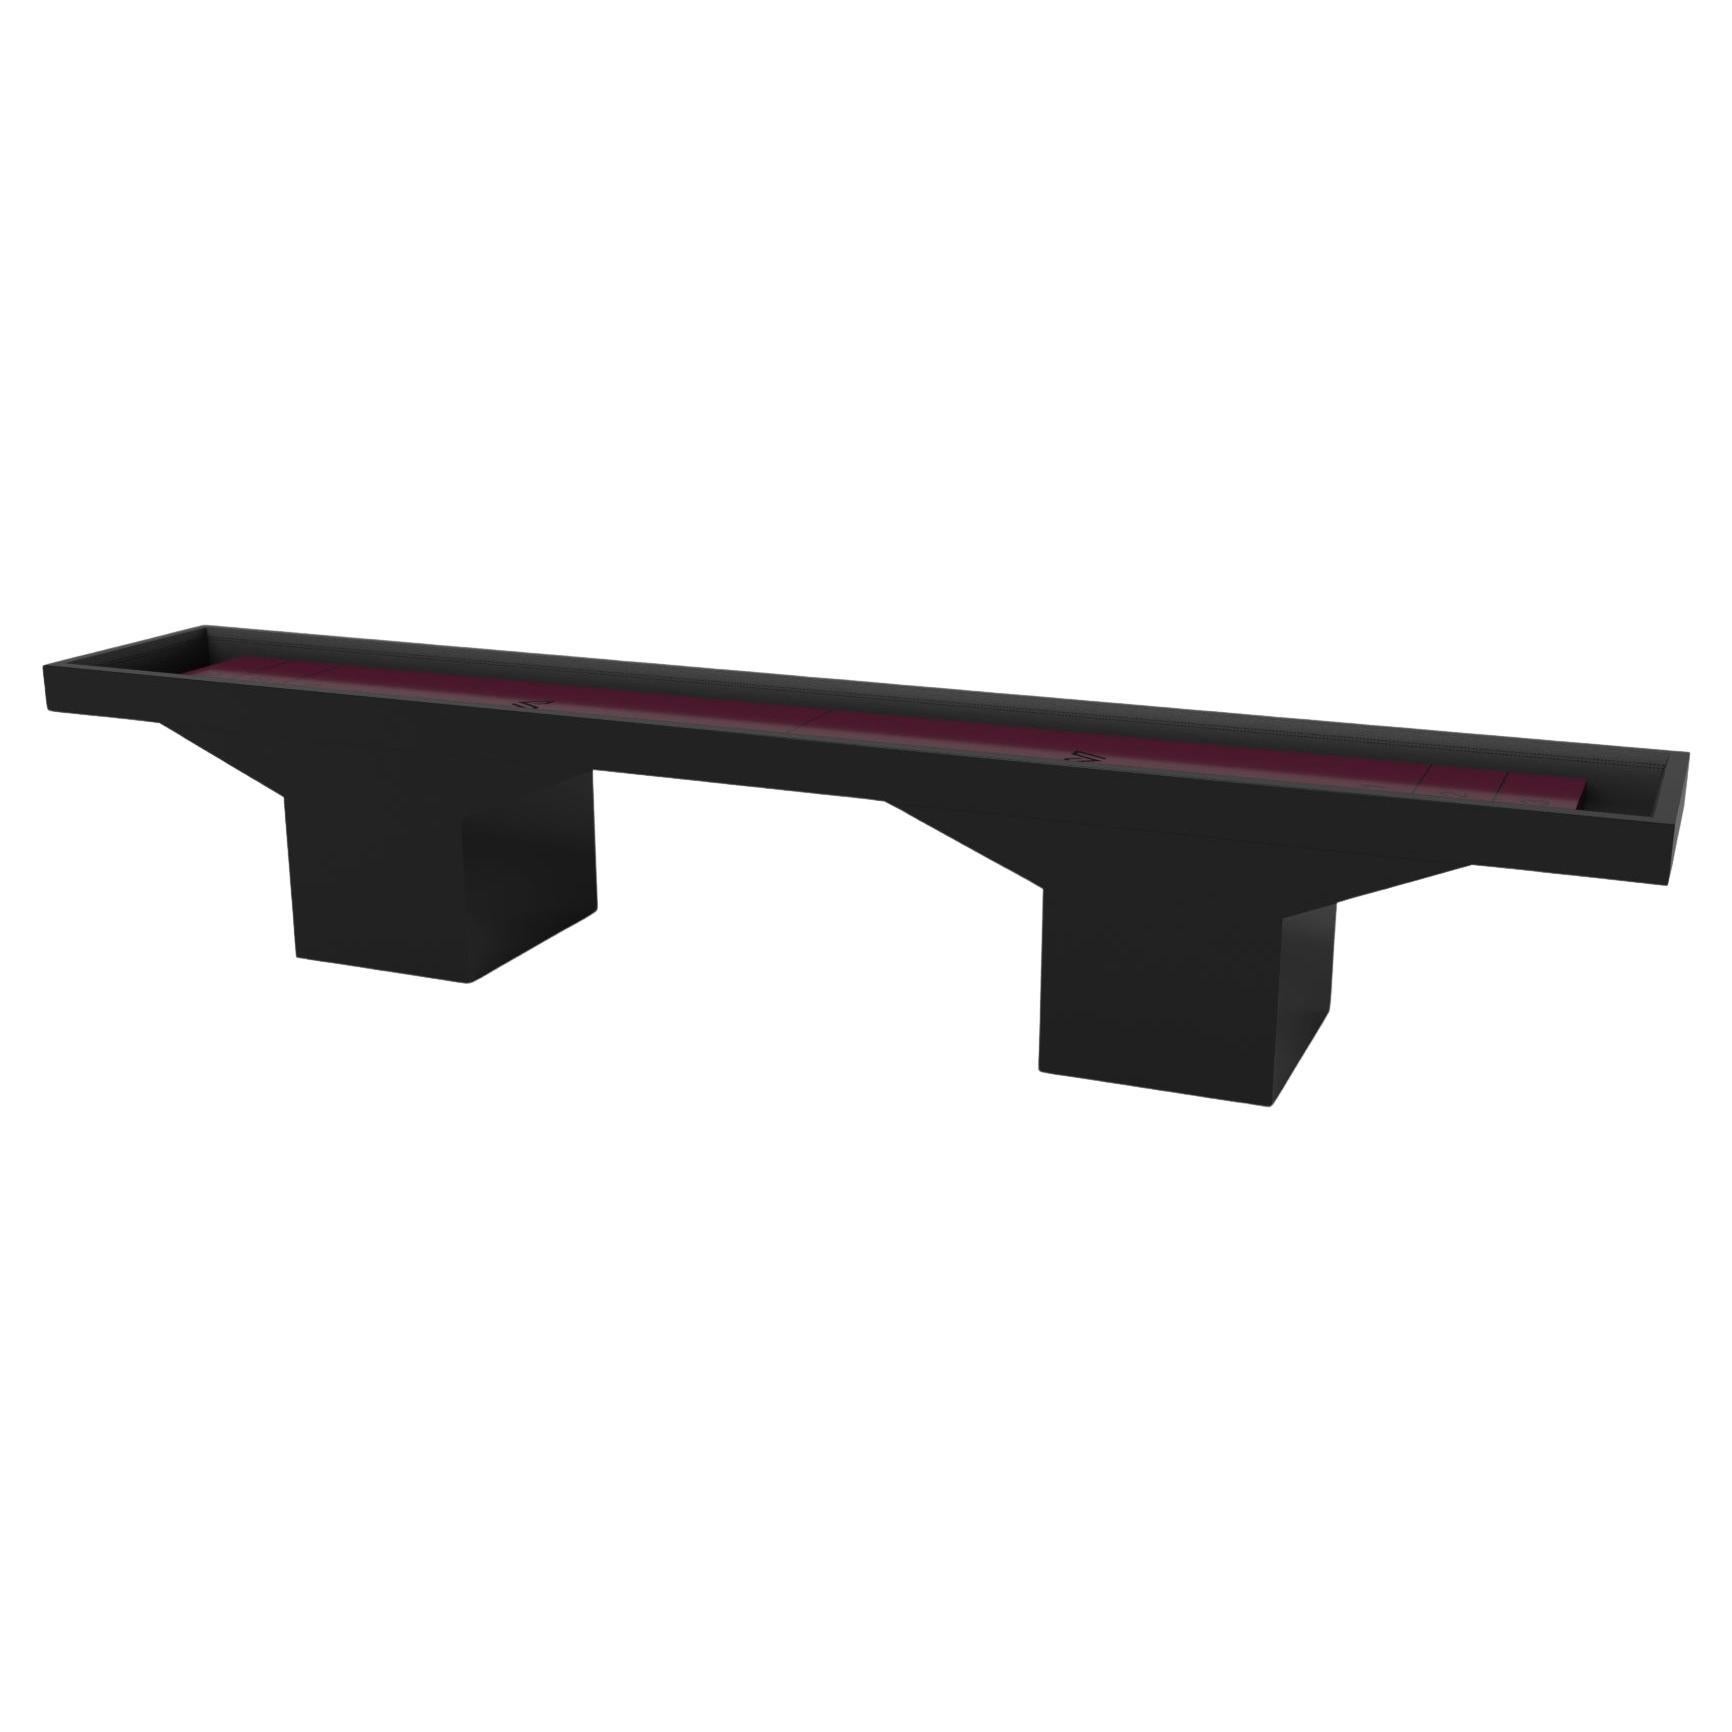 Elevate Customs Trestle Shuffleboard Tables /Solid Pantone Black Color in 9'-USA For Sale